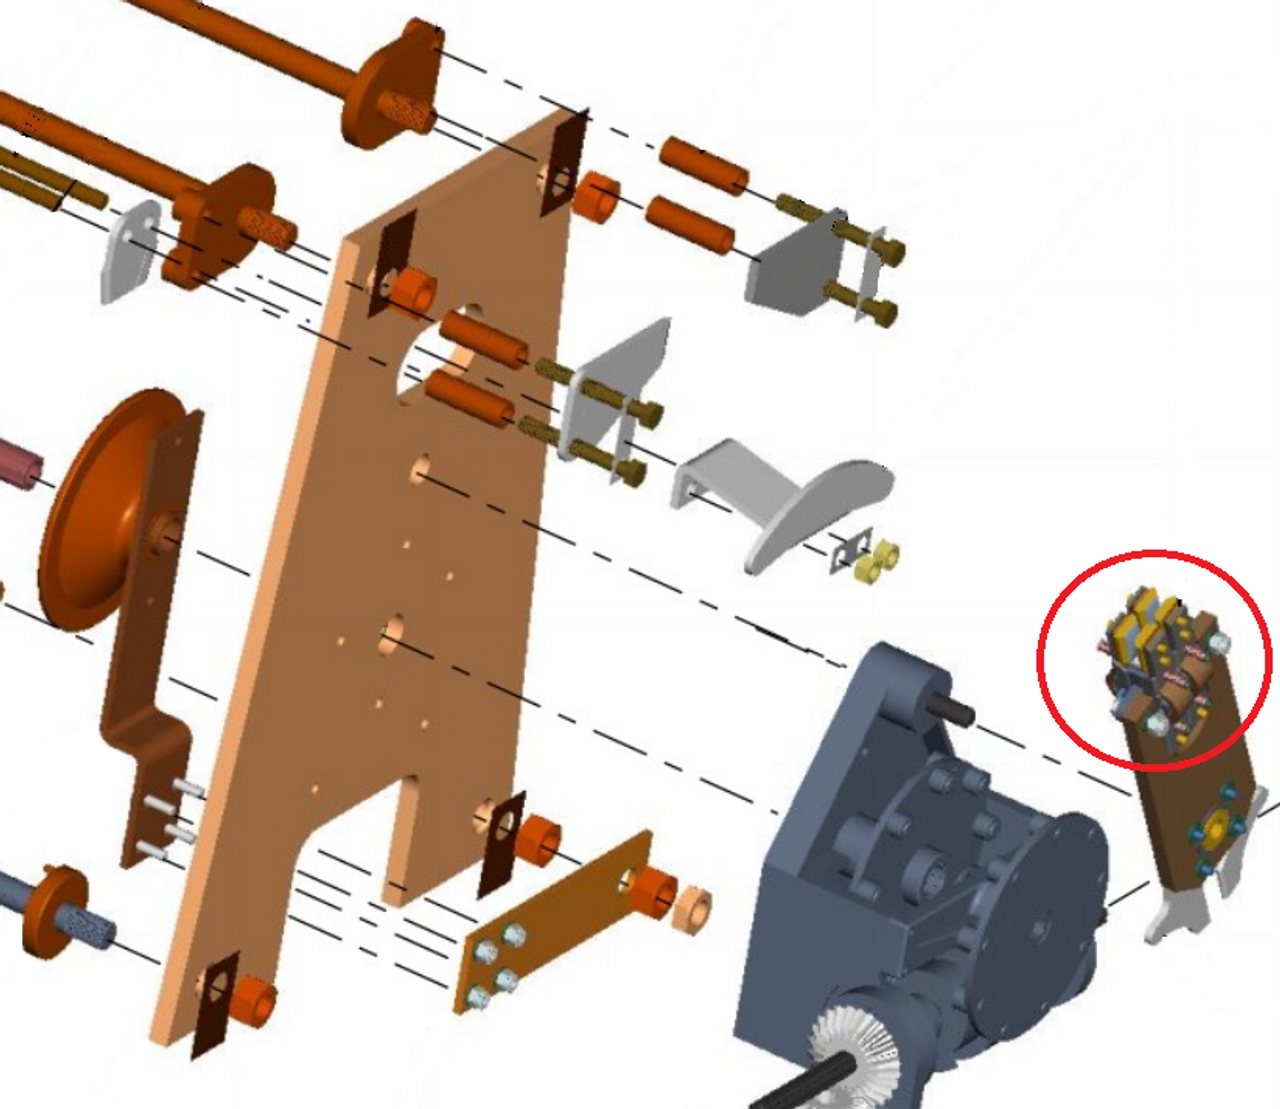 3D model of 550 reversing switch assembly with moving contact circled in red